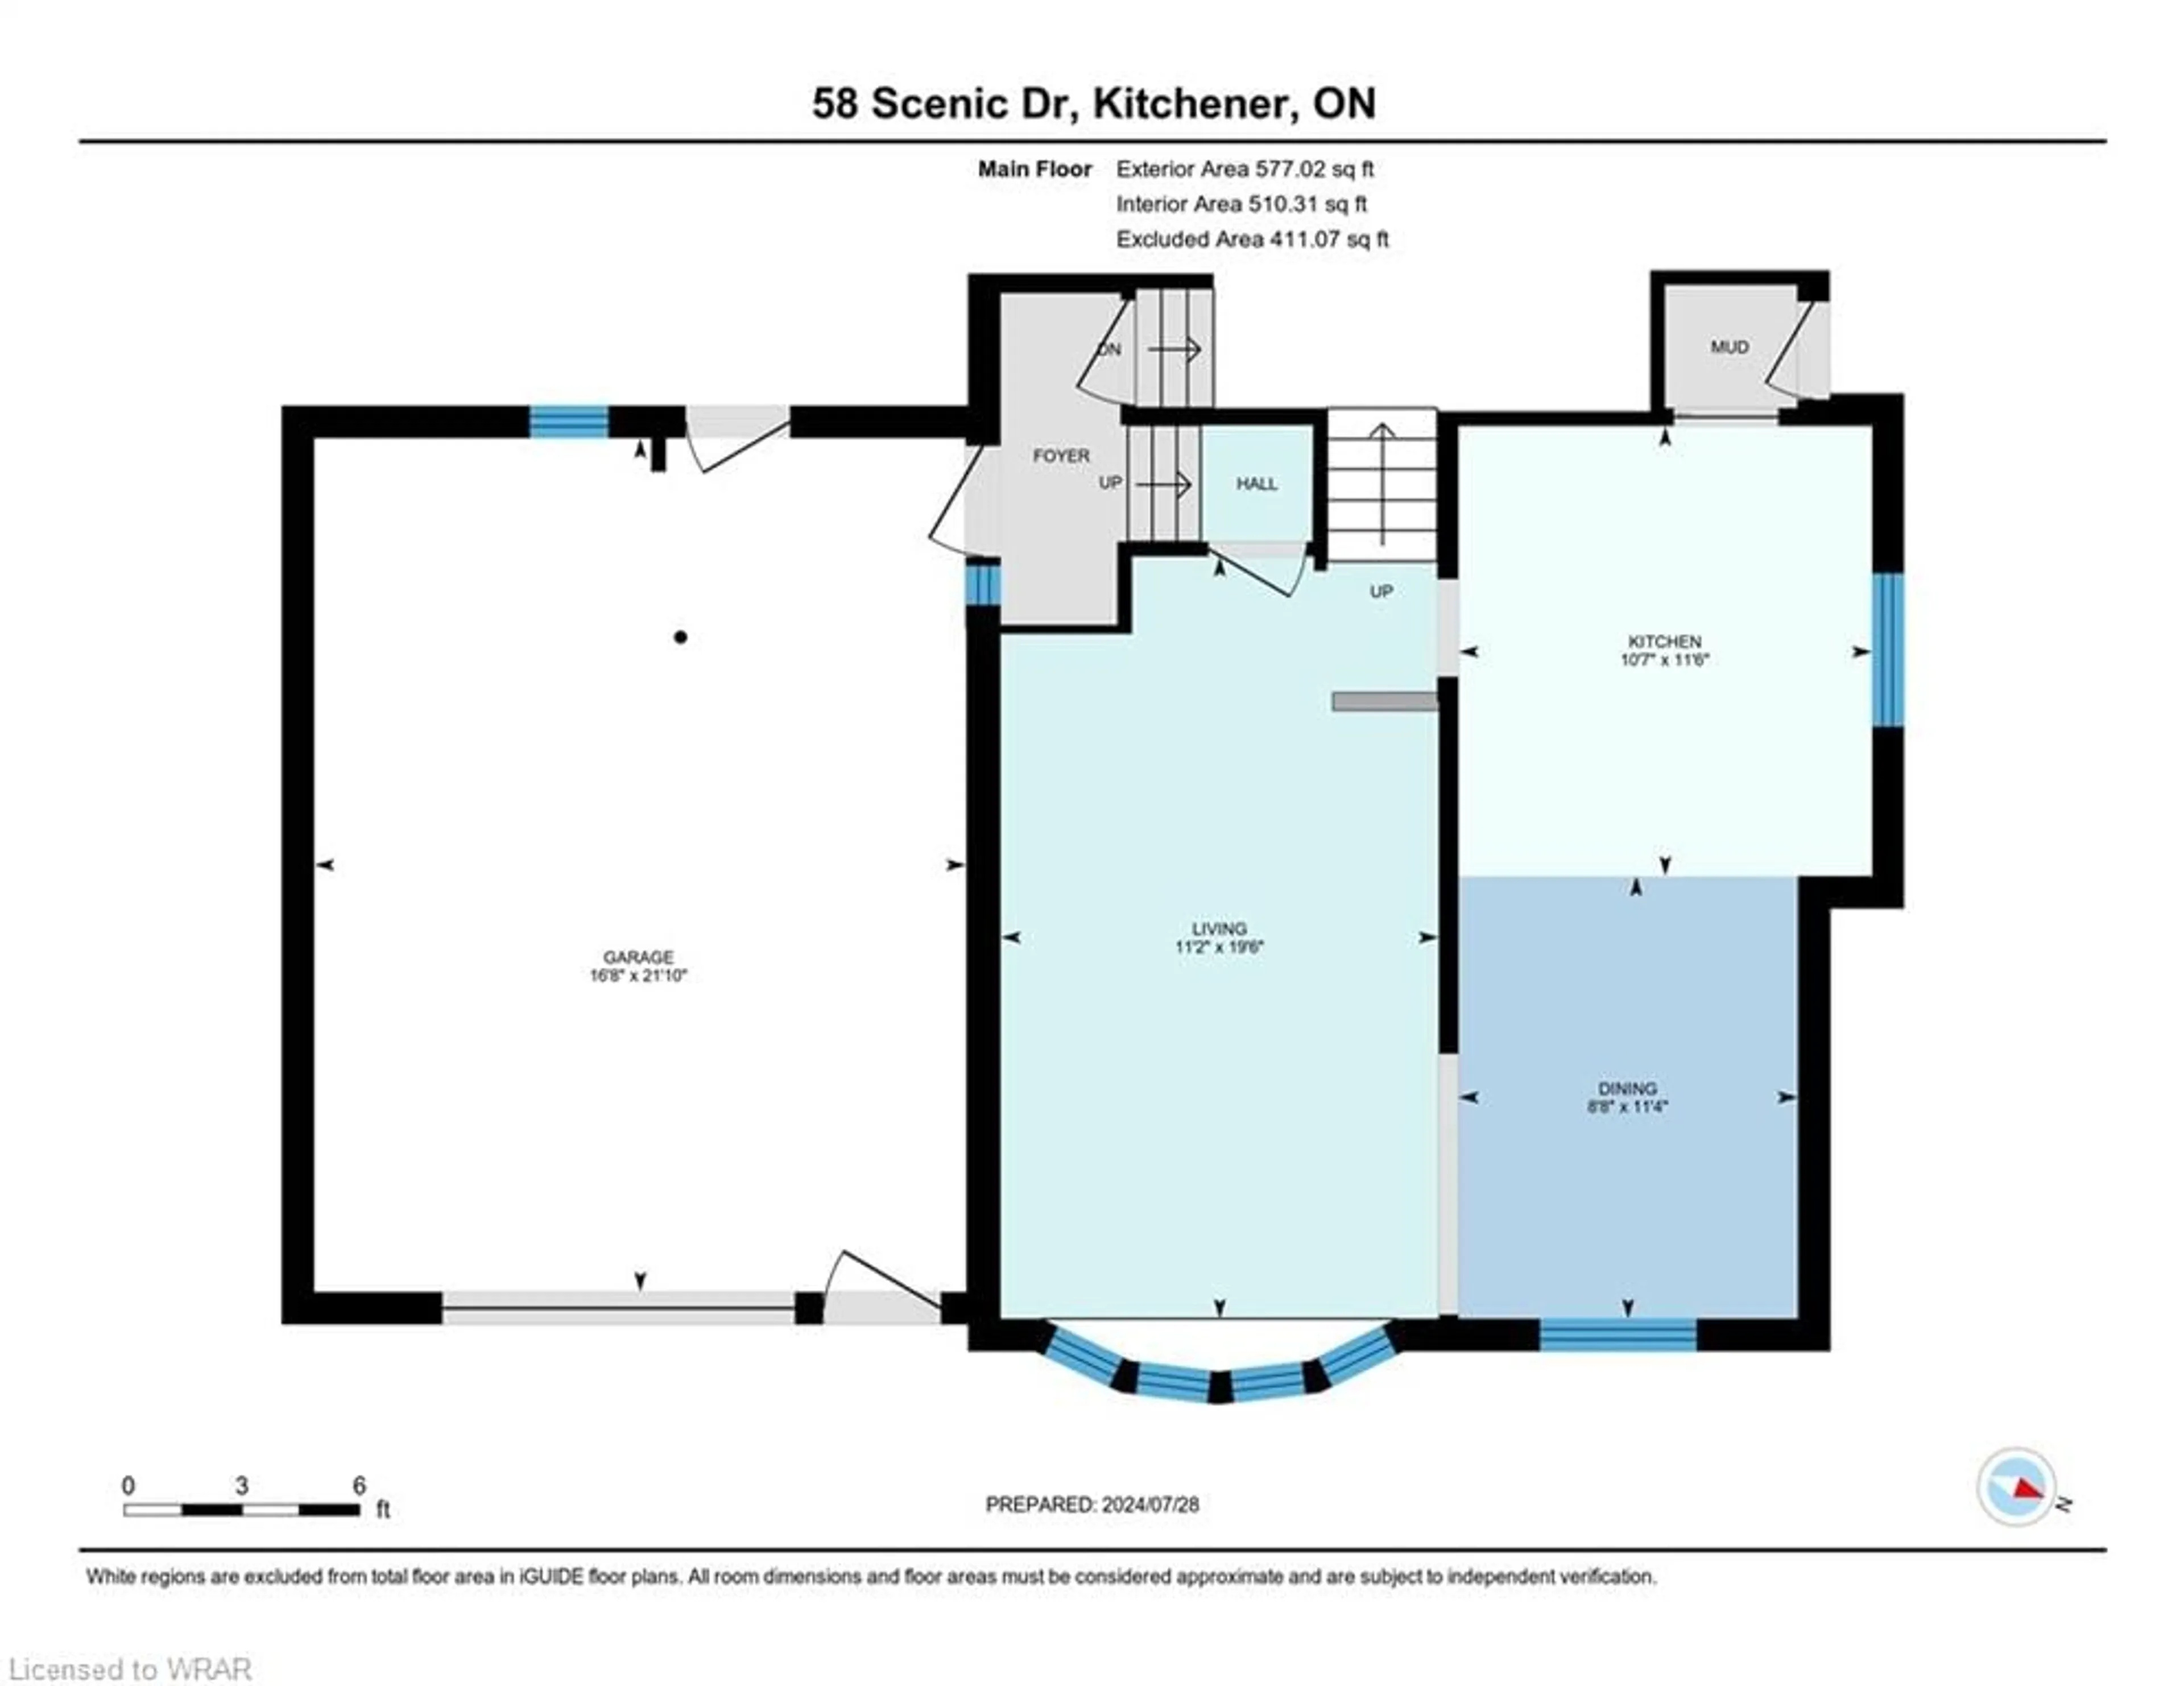 Floor plan for 58 Scenic Dr, Kitchener Ontario N2A 2P6